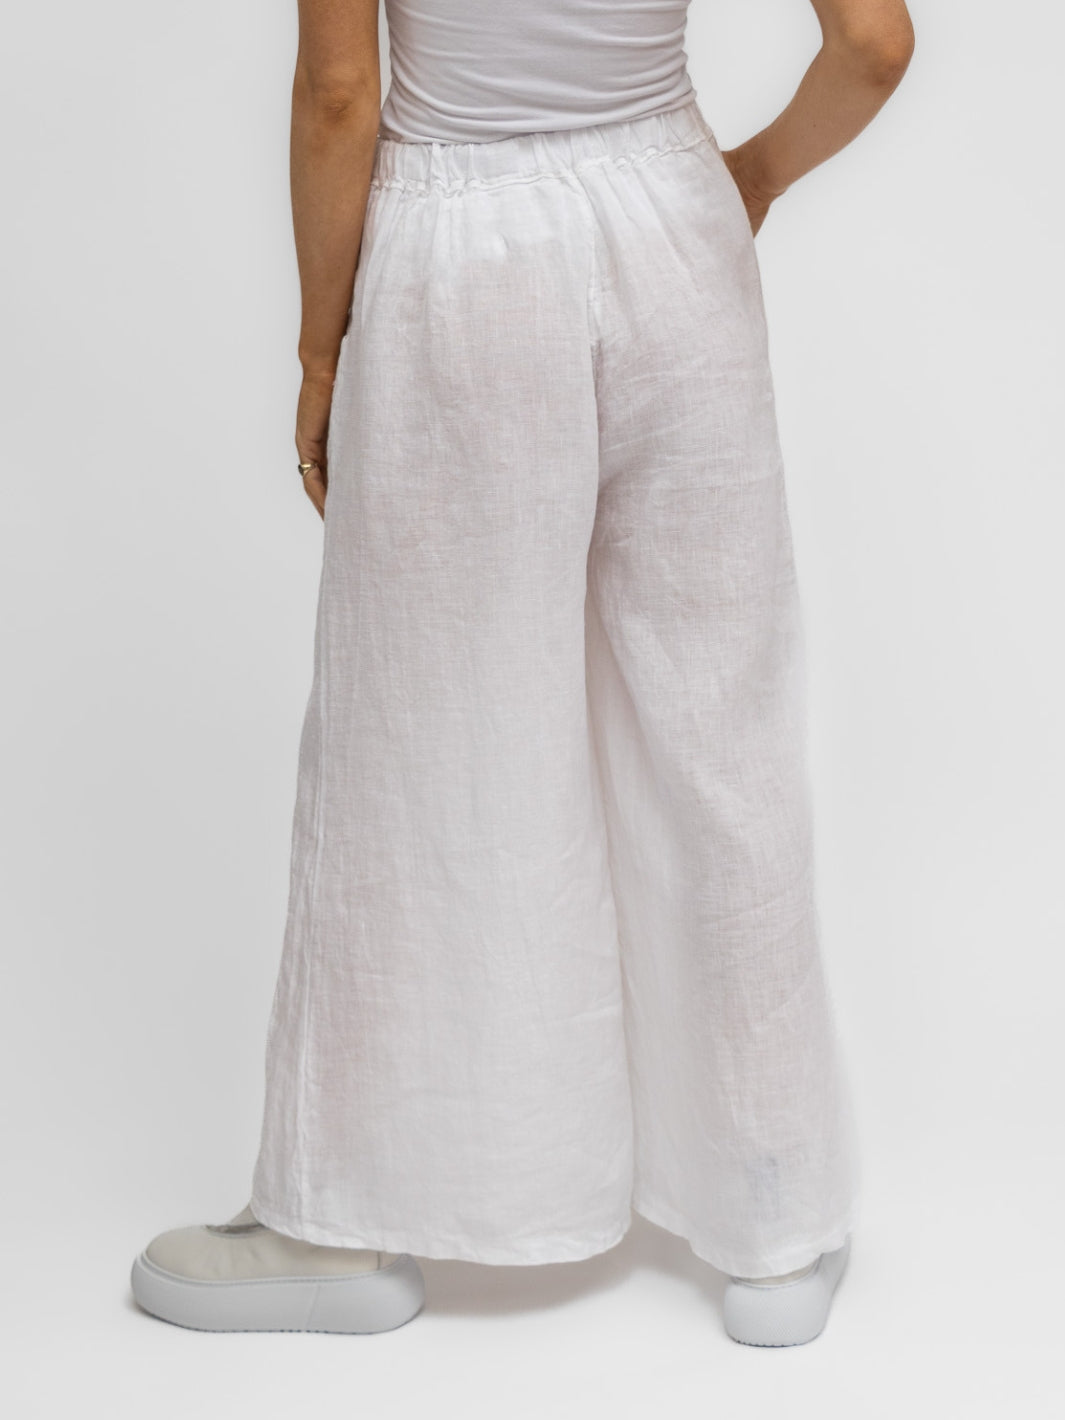 Diffusion by Kate Trousers One Size Linen Palazzo Trousers in White